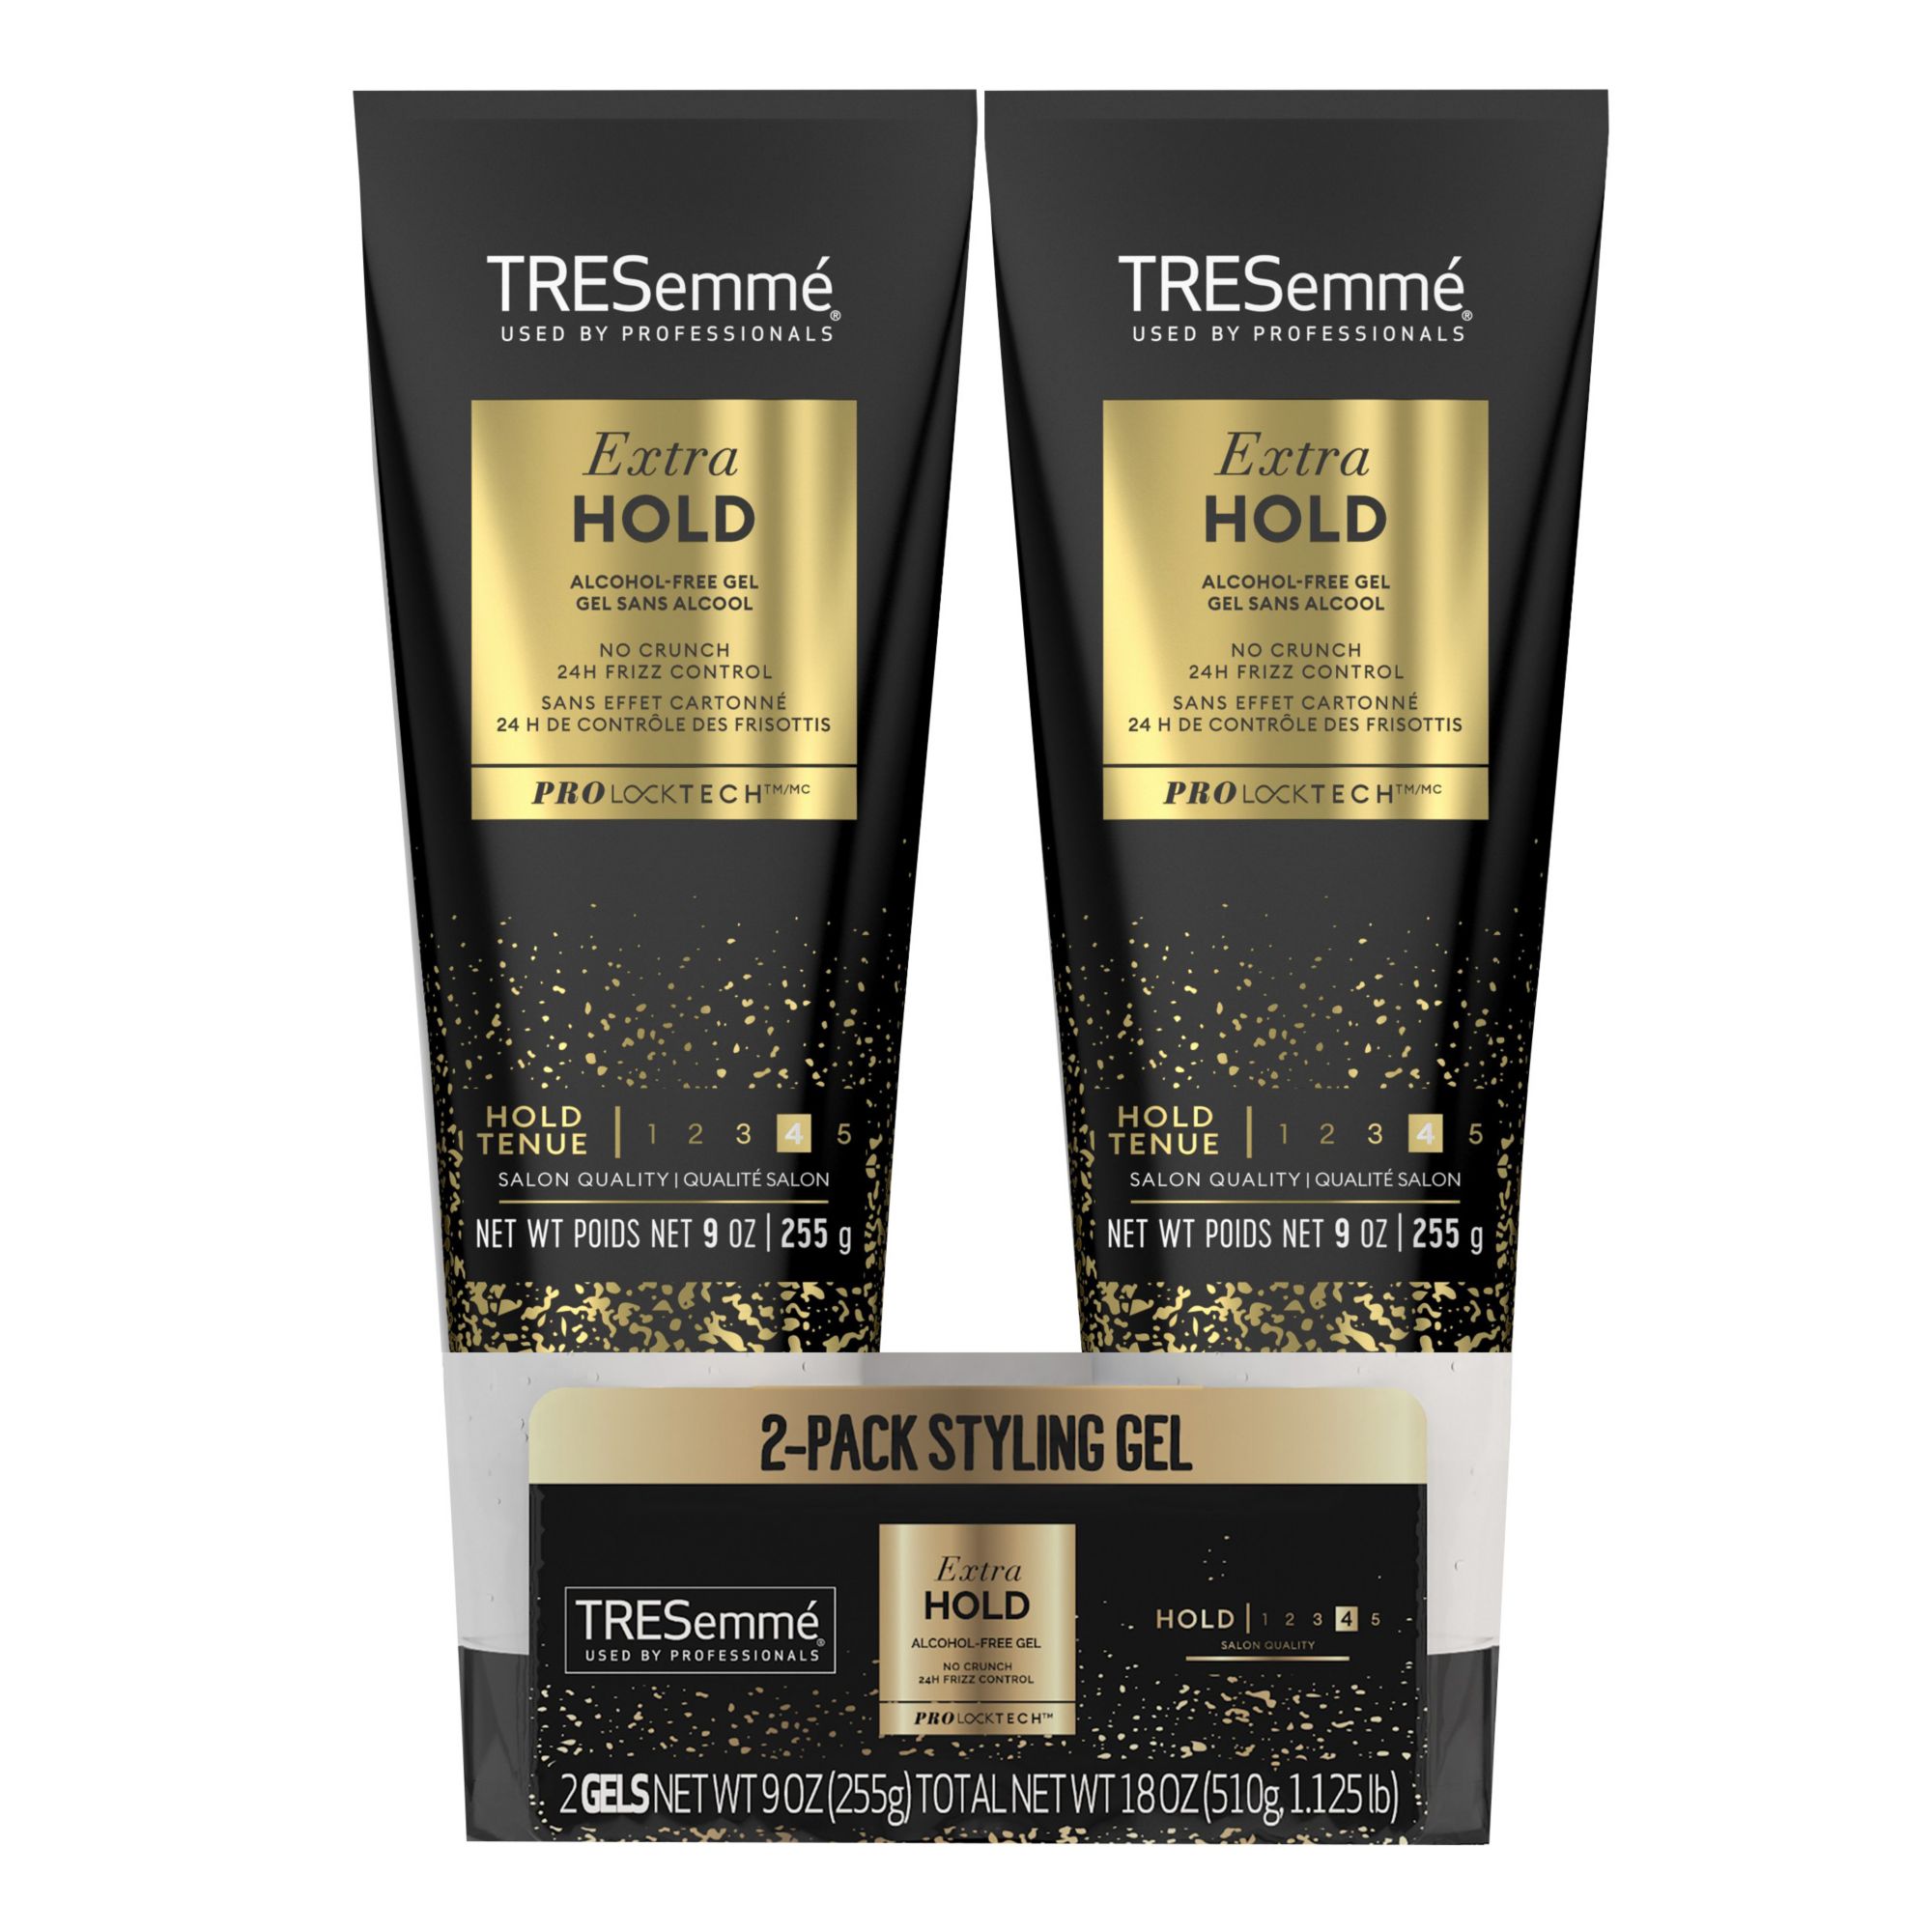 TRESemme Extra Hold Hair Gel Alcohol-Free for 24-Hour Frizz Control and Humidity Protection, 2 pk./9 oz.